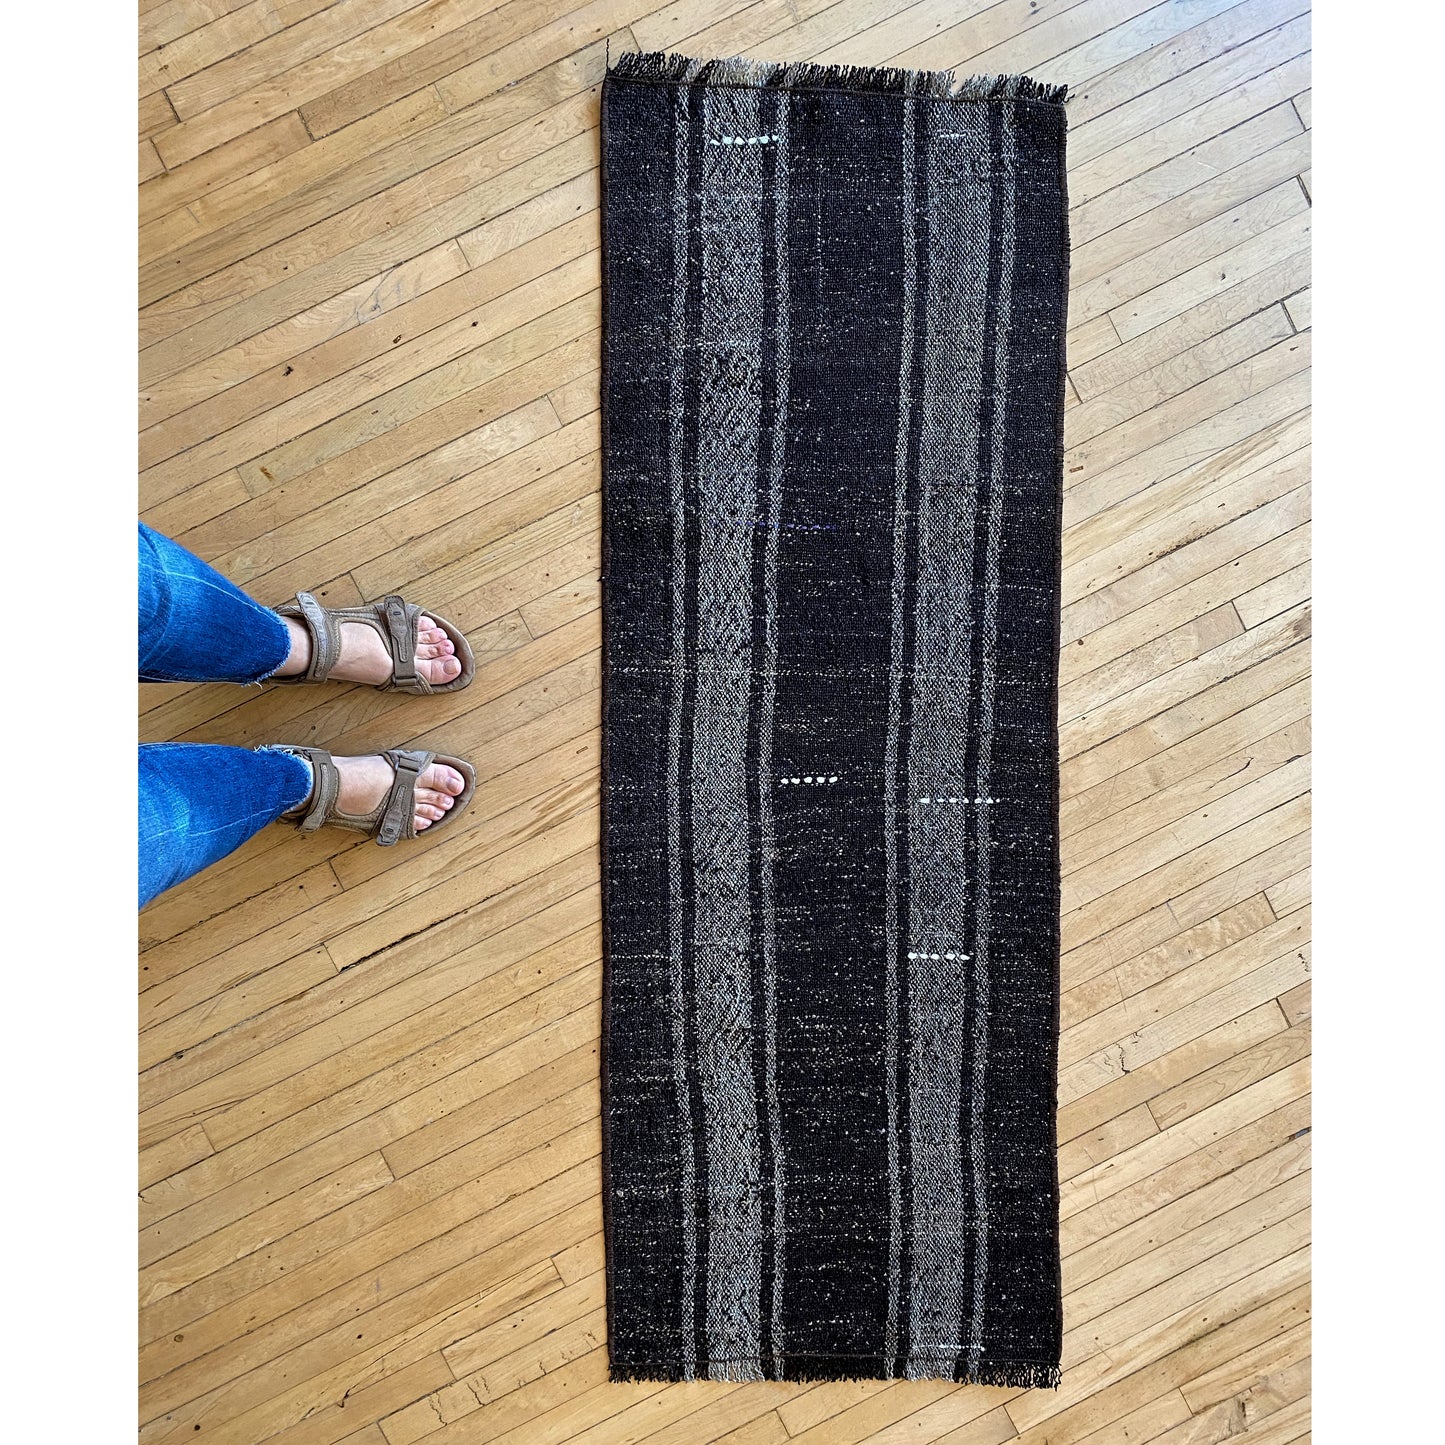 Hand-knotted Turkish Runner Rug (1'8" x 4'9")